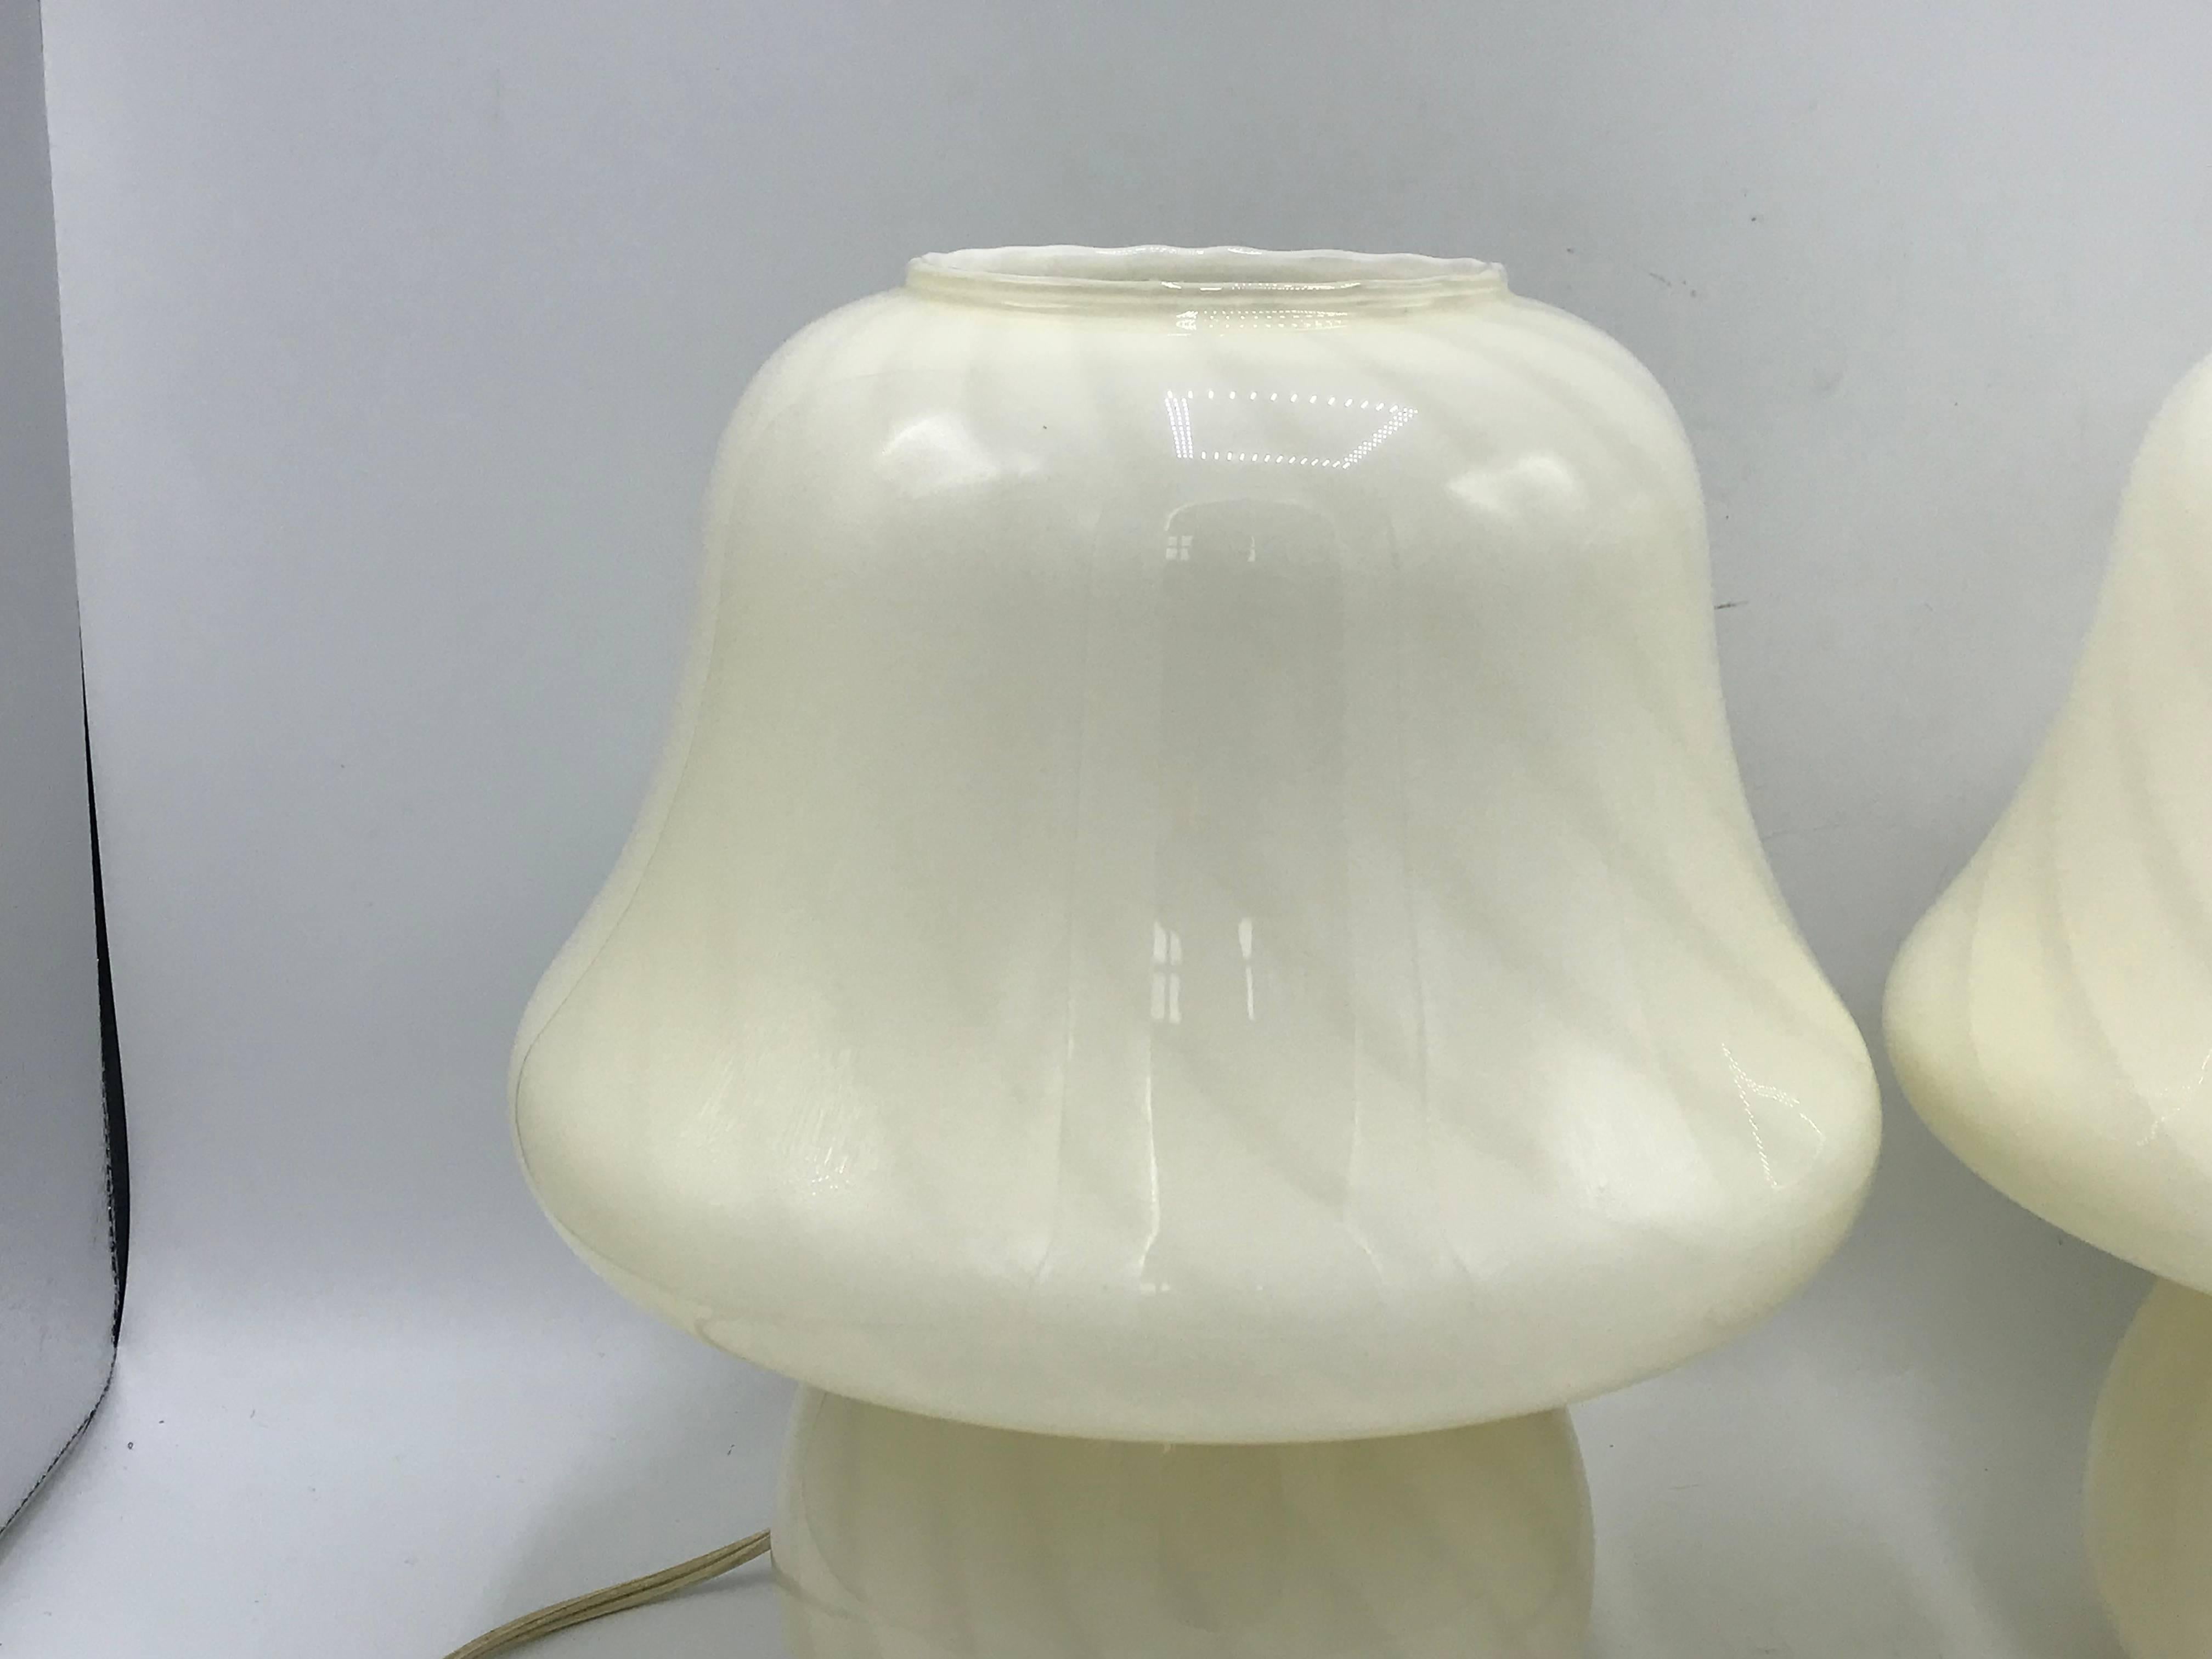 Listed is an exquisite, pair of 1970s Italian, white Murano glass lamps. The pair of mushroom lamps were designed by world-renowned Vetri. Felt-lined underside.